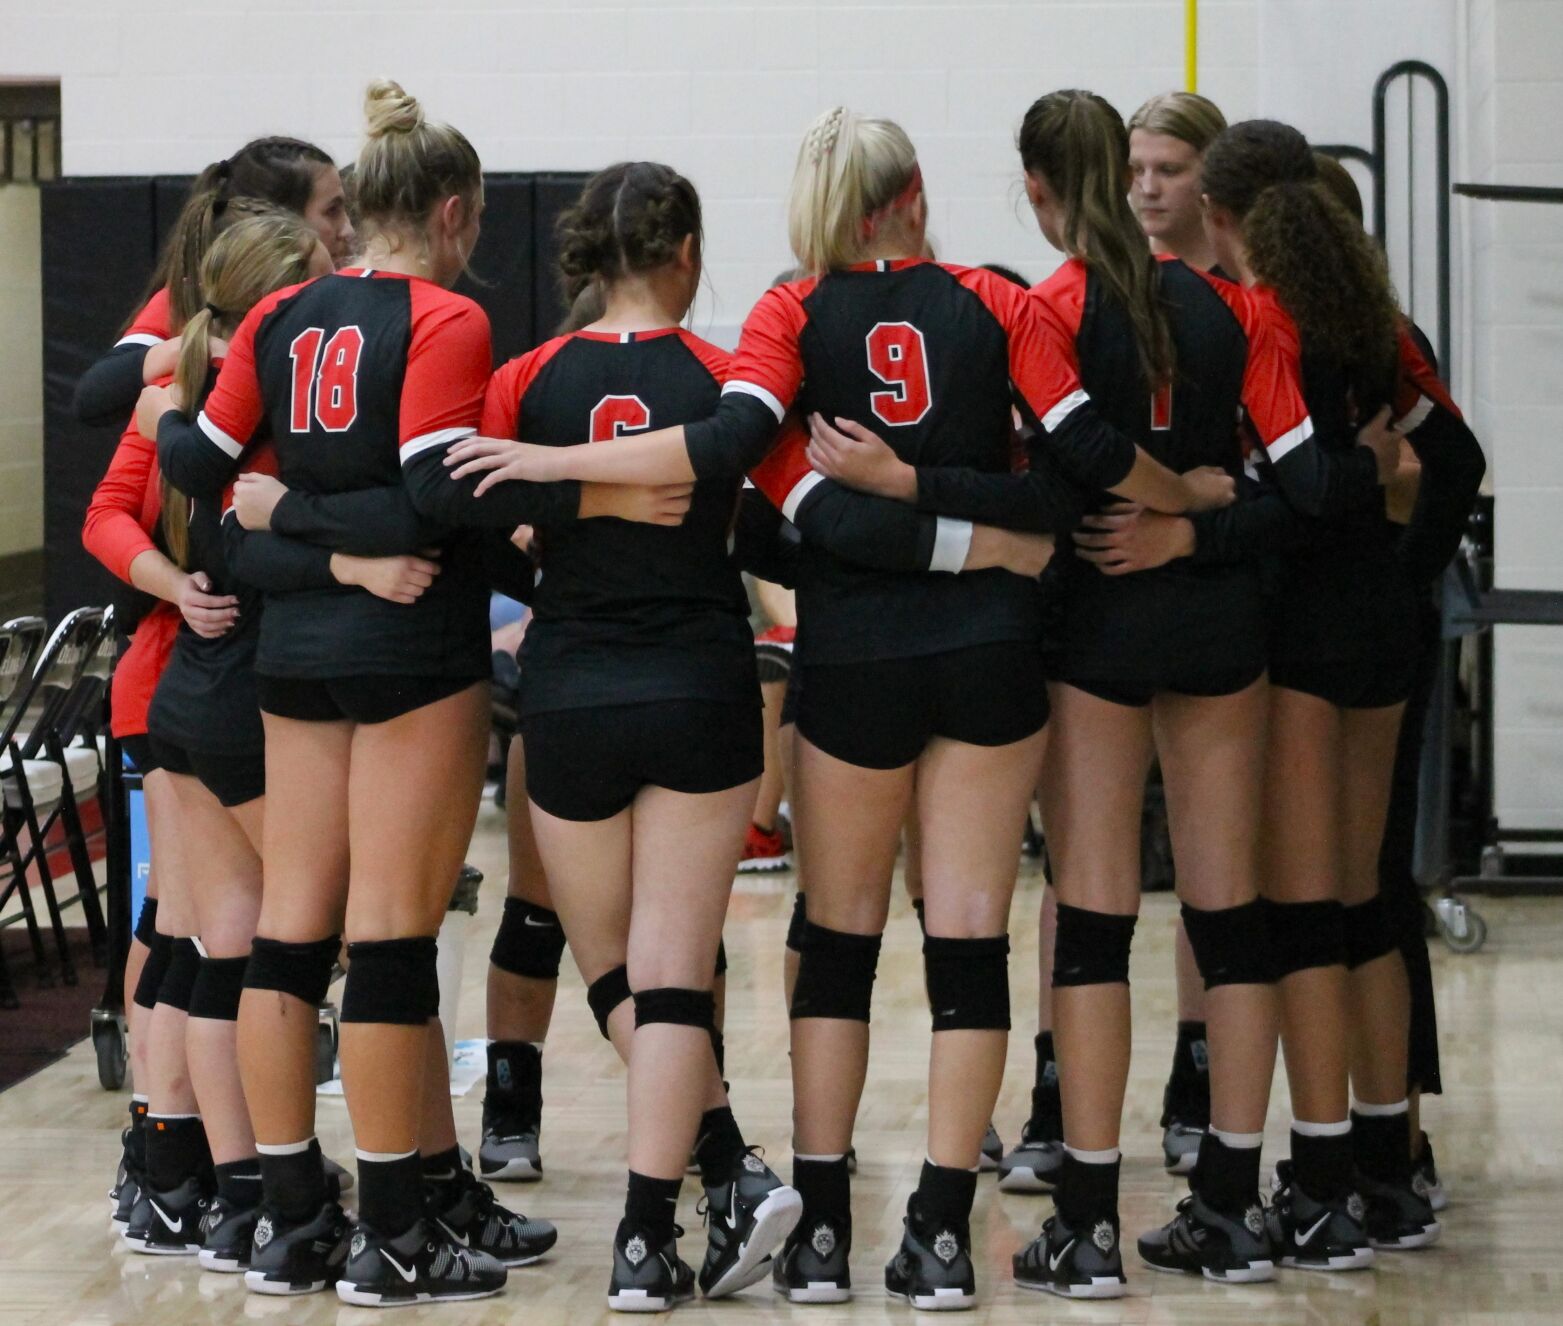 Circleville Lady Tigers Deliver Impressive 3-0 Shutout Win Against Amanda-Clearcreek Aces in Volleyball Match